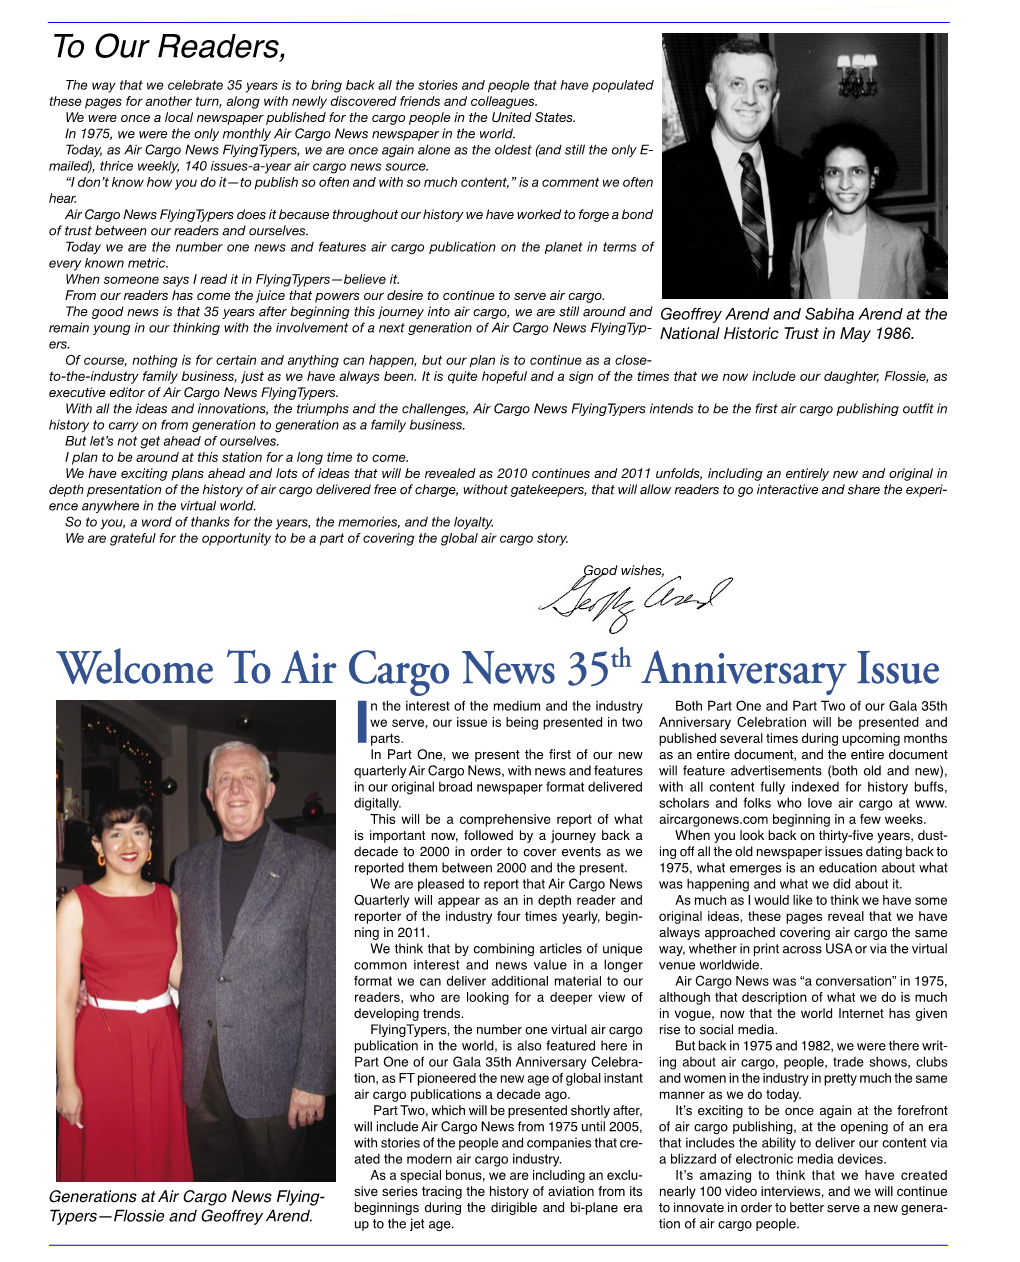 Welcome to Air Cargo News 35Th Anniversary Issue